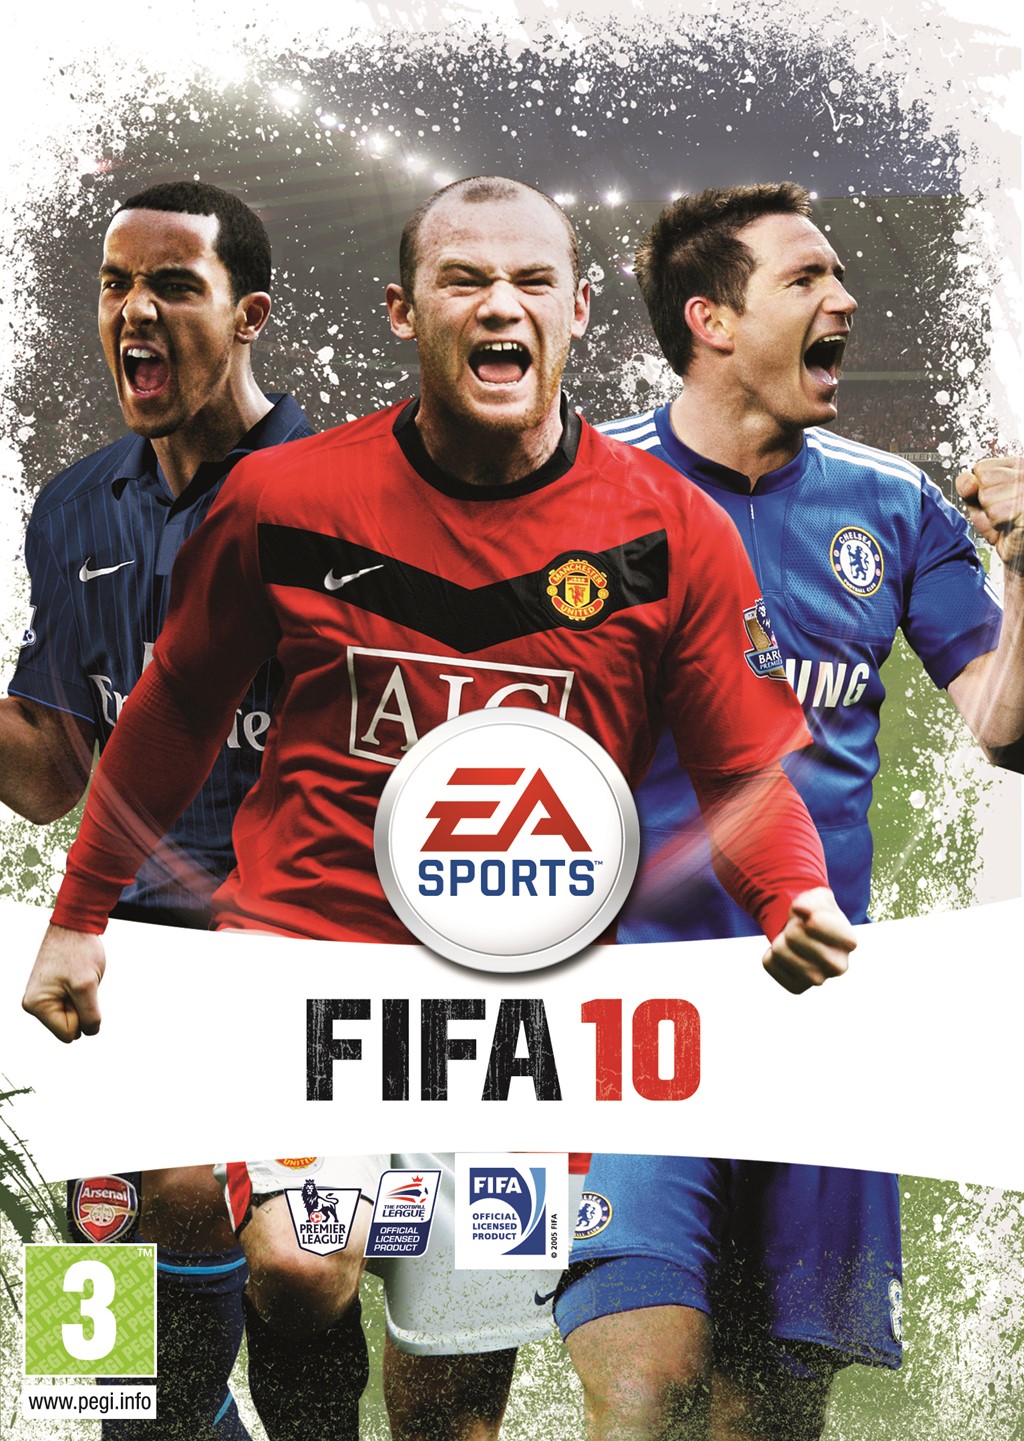 Every FIFA cover athlete